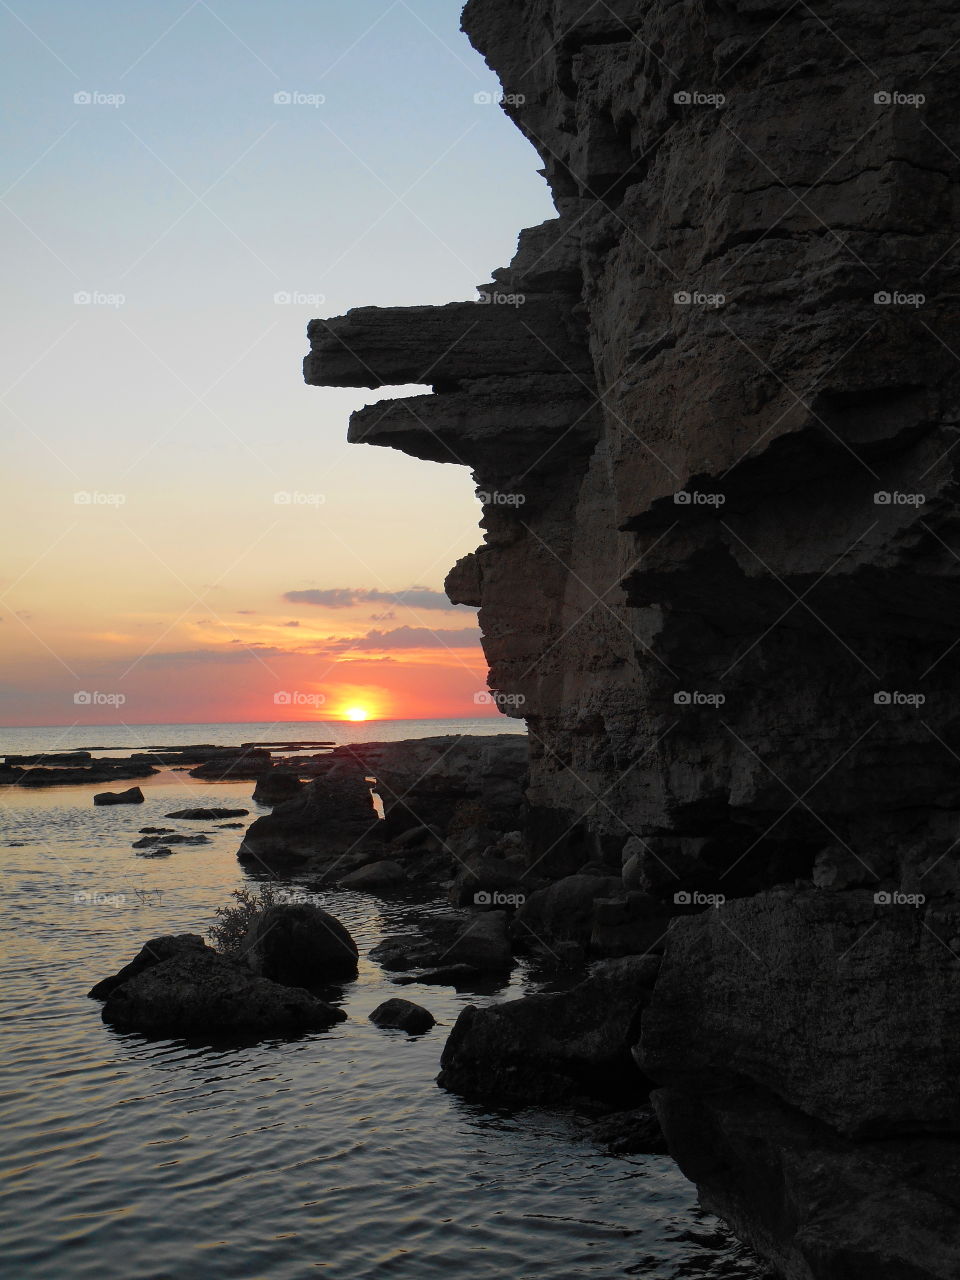 sunset on a sea shore and stones rocks art nature